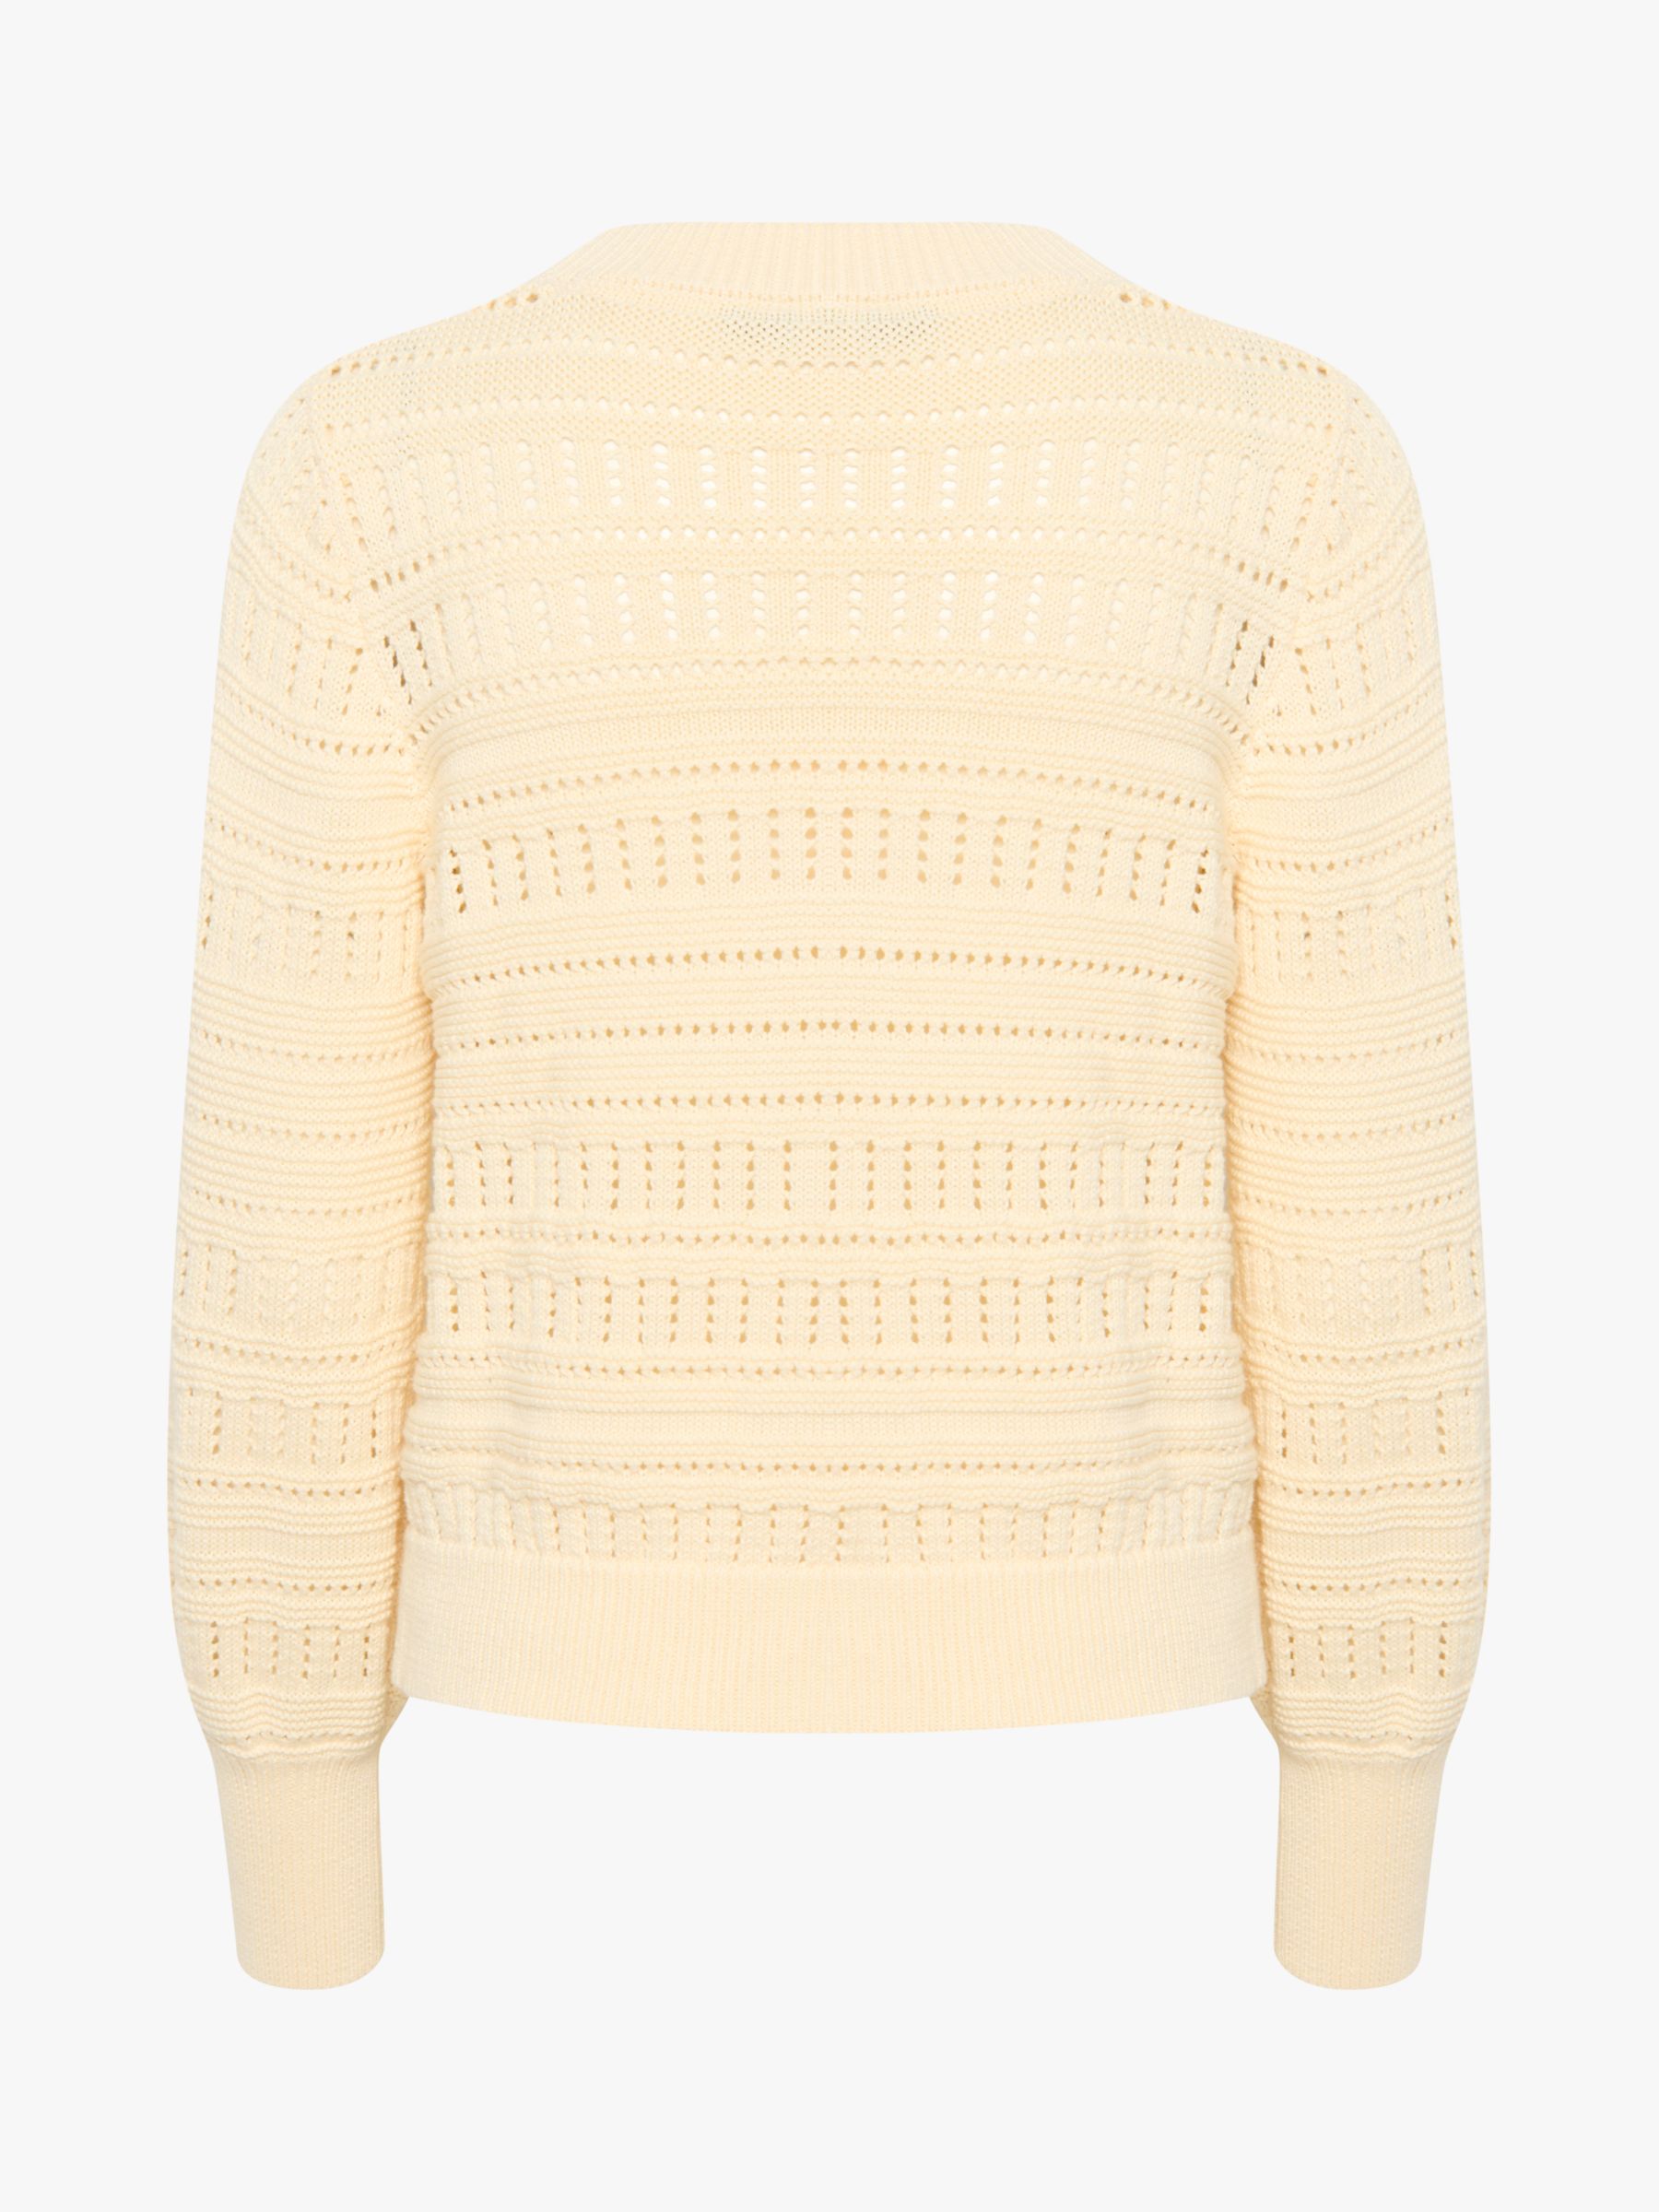 Buy Soaked In Luxury Rava Crochet Knit Cardigan, Pearled Ivory Online at johnlewis.com